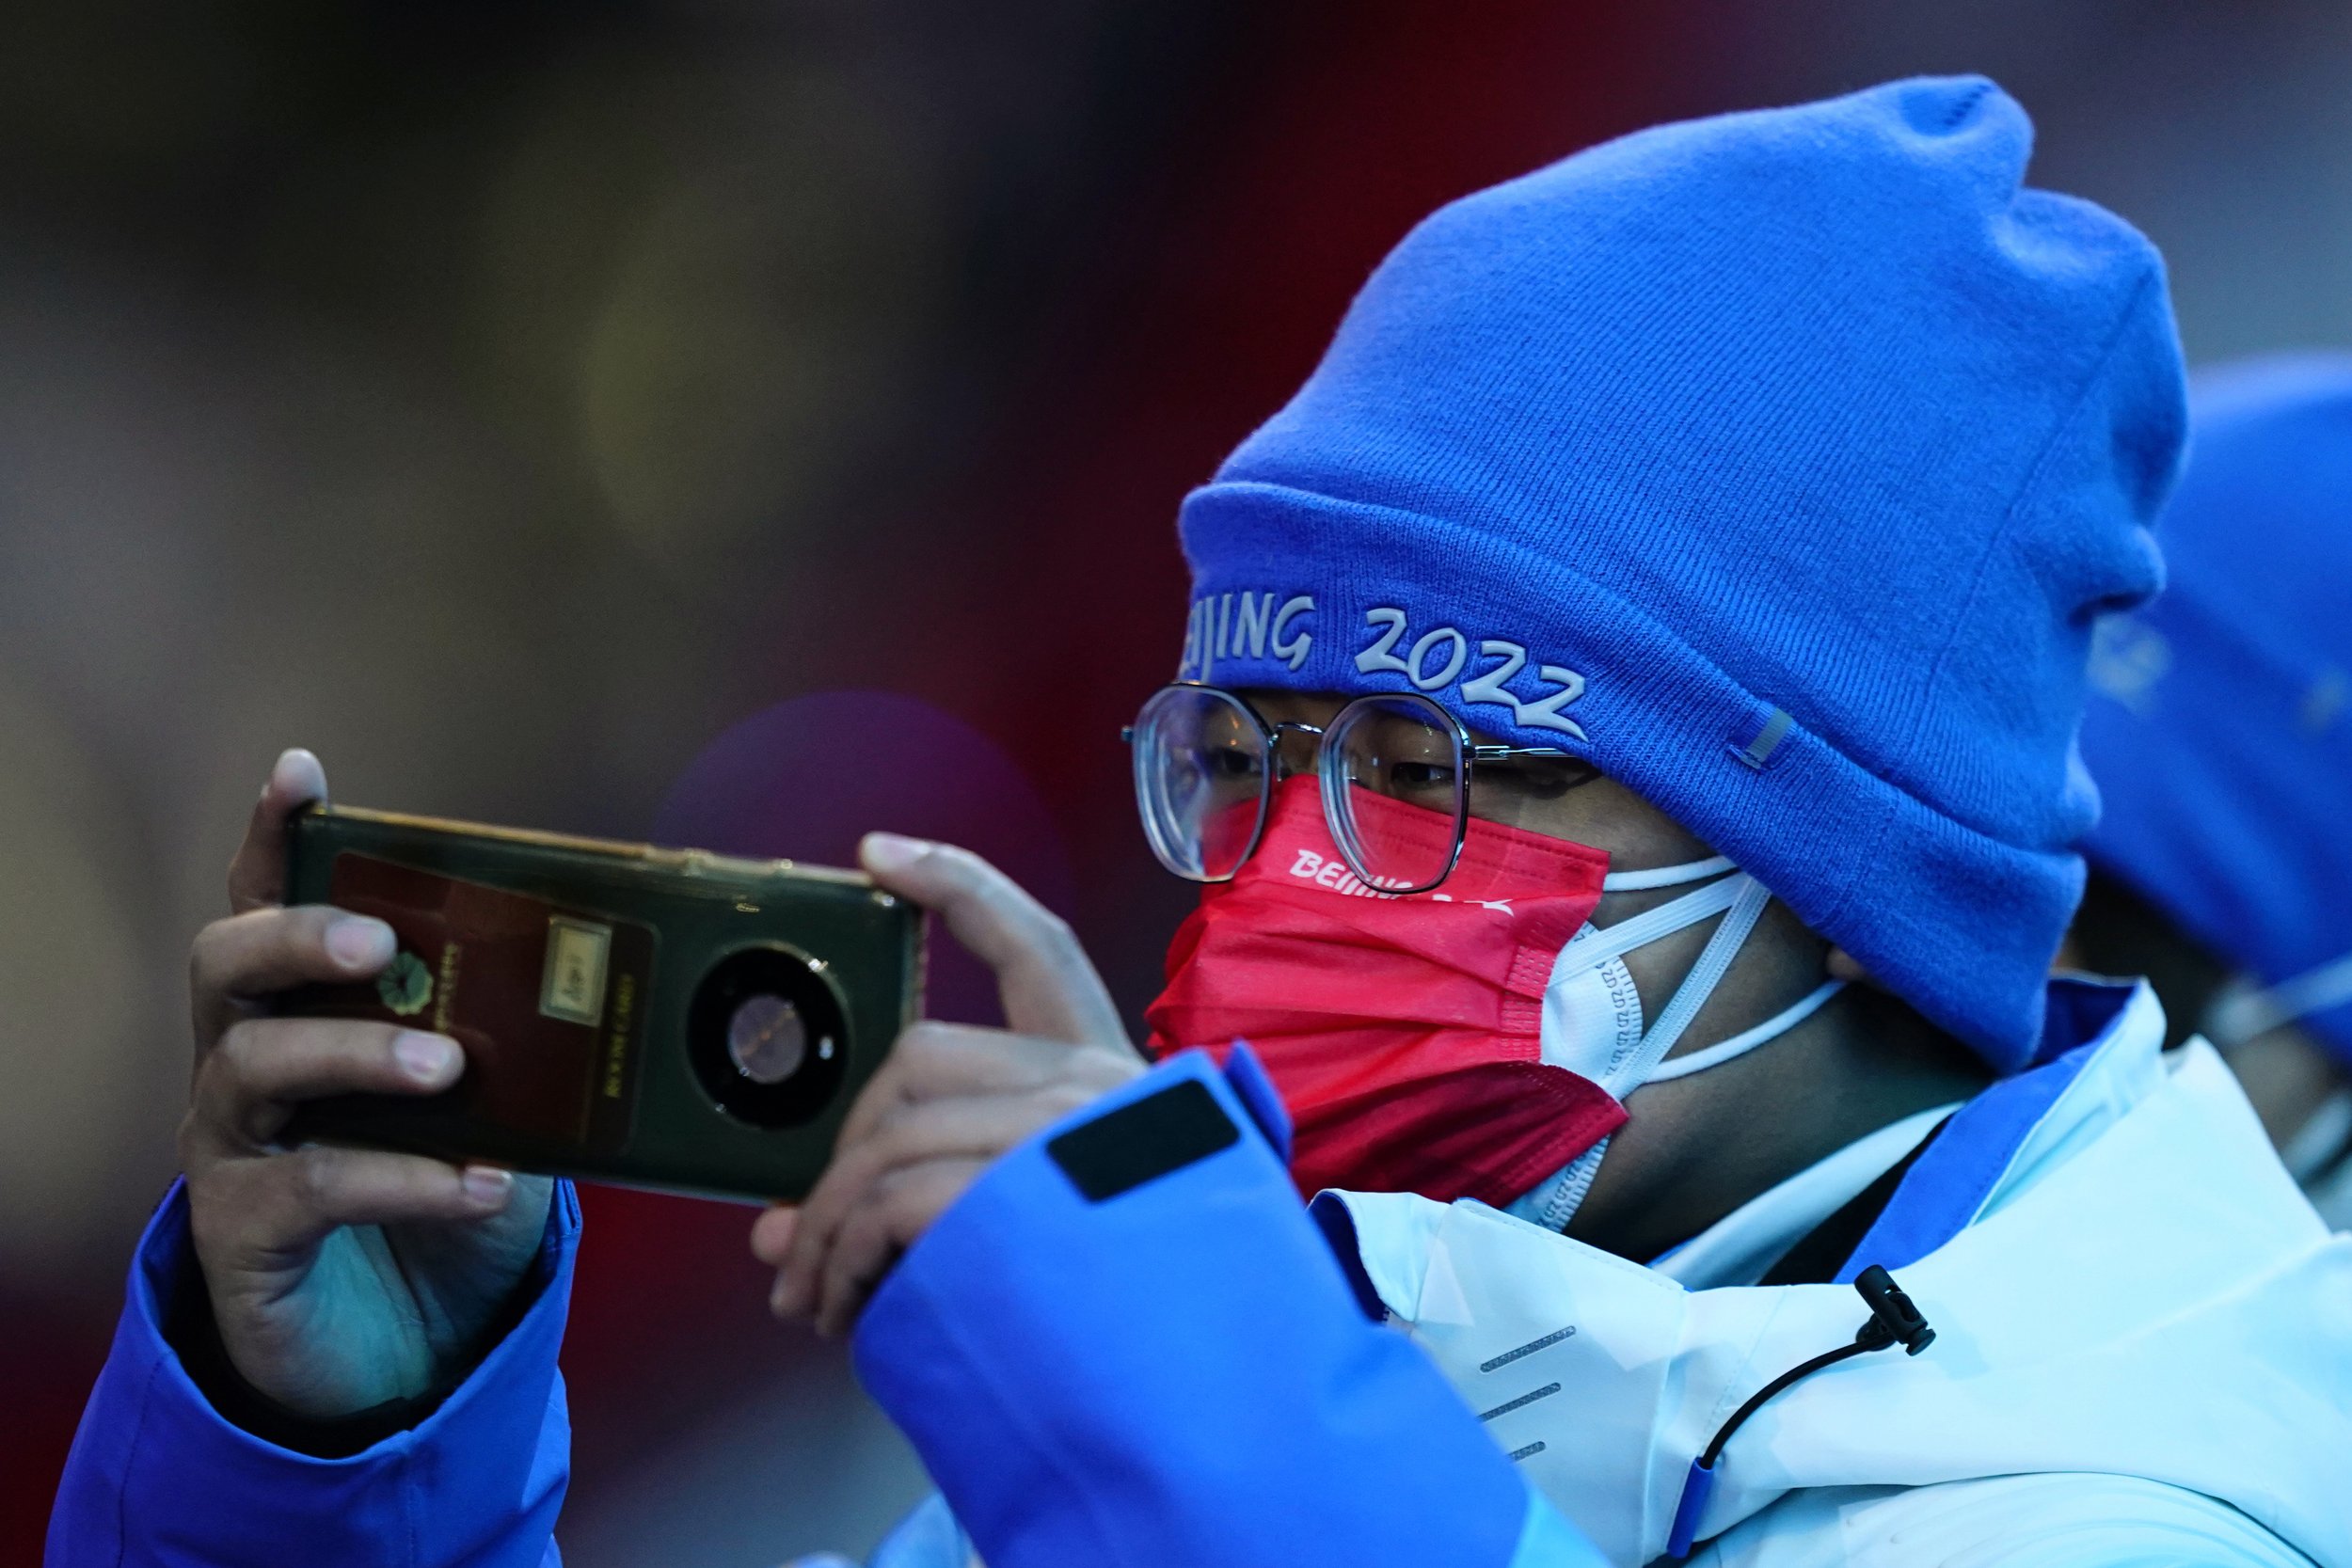  A spectator takes a photo during the pre-show ahead of the opening ceremony of the 2022 Winter Olympics, Friday, Feb. 4, 2022, in Beijing. (AP Photo/Matt Slocum) 